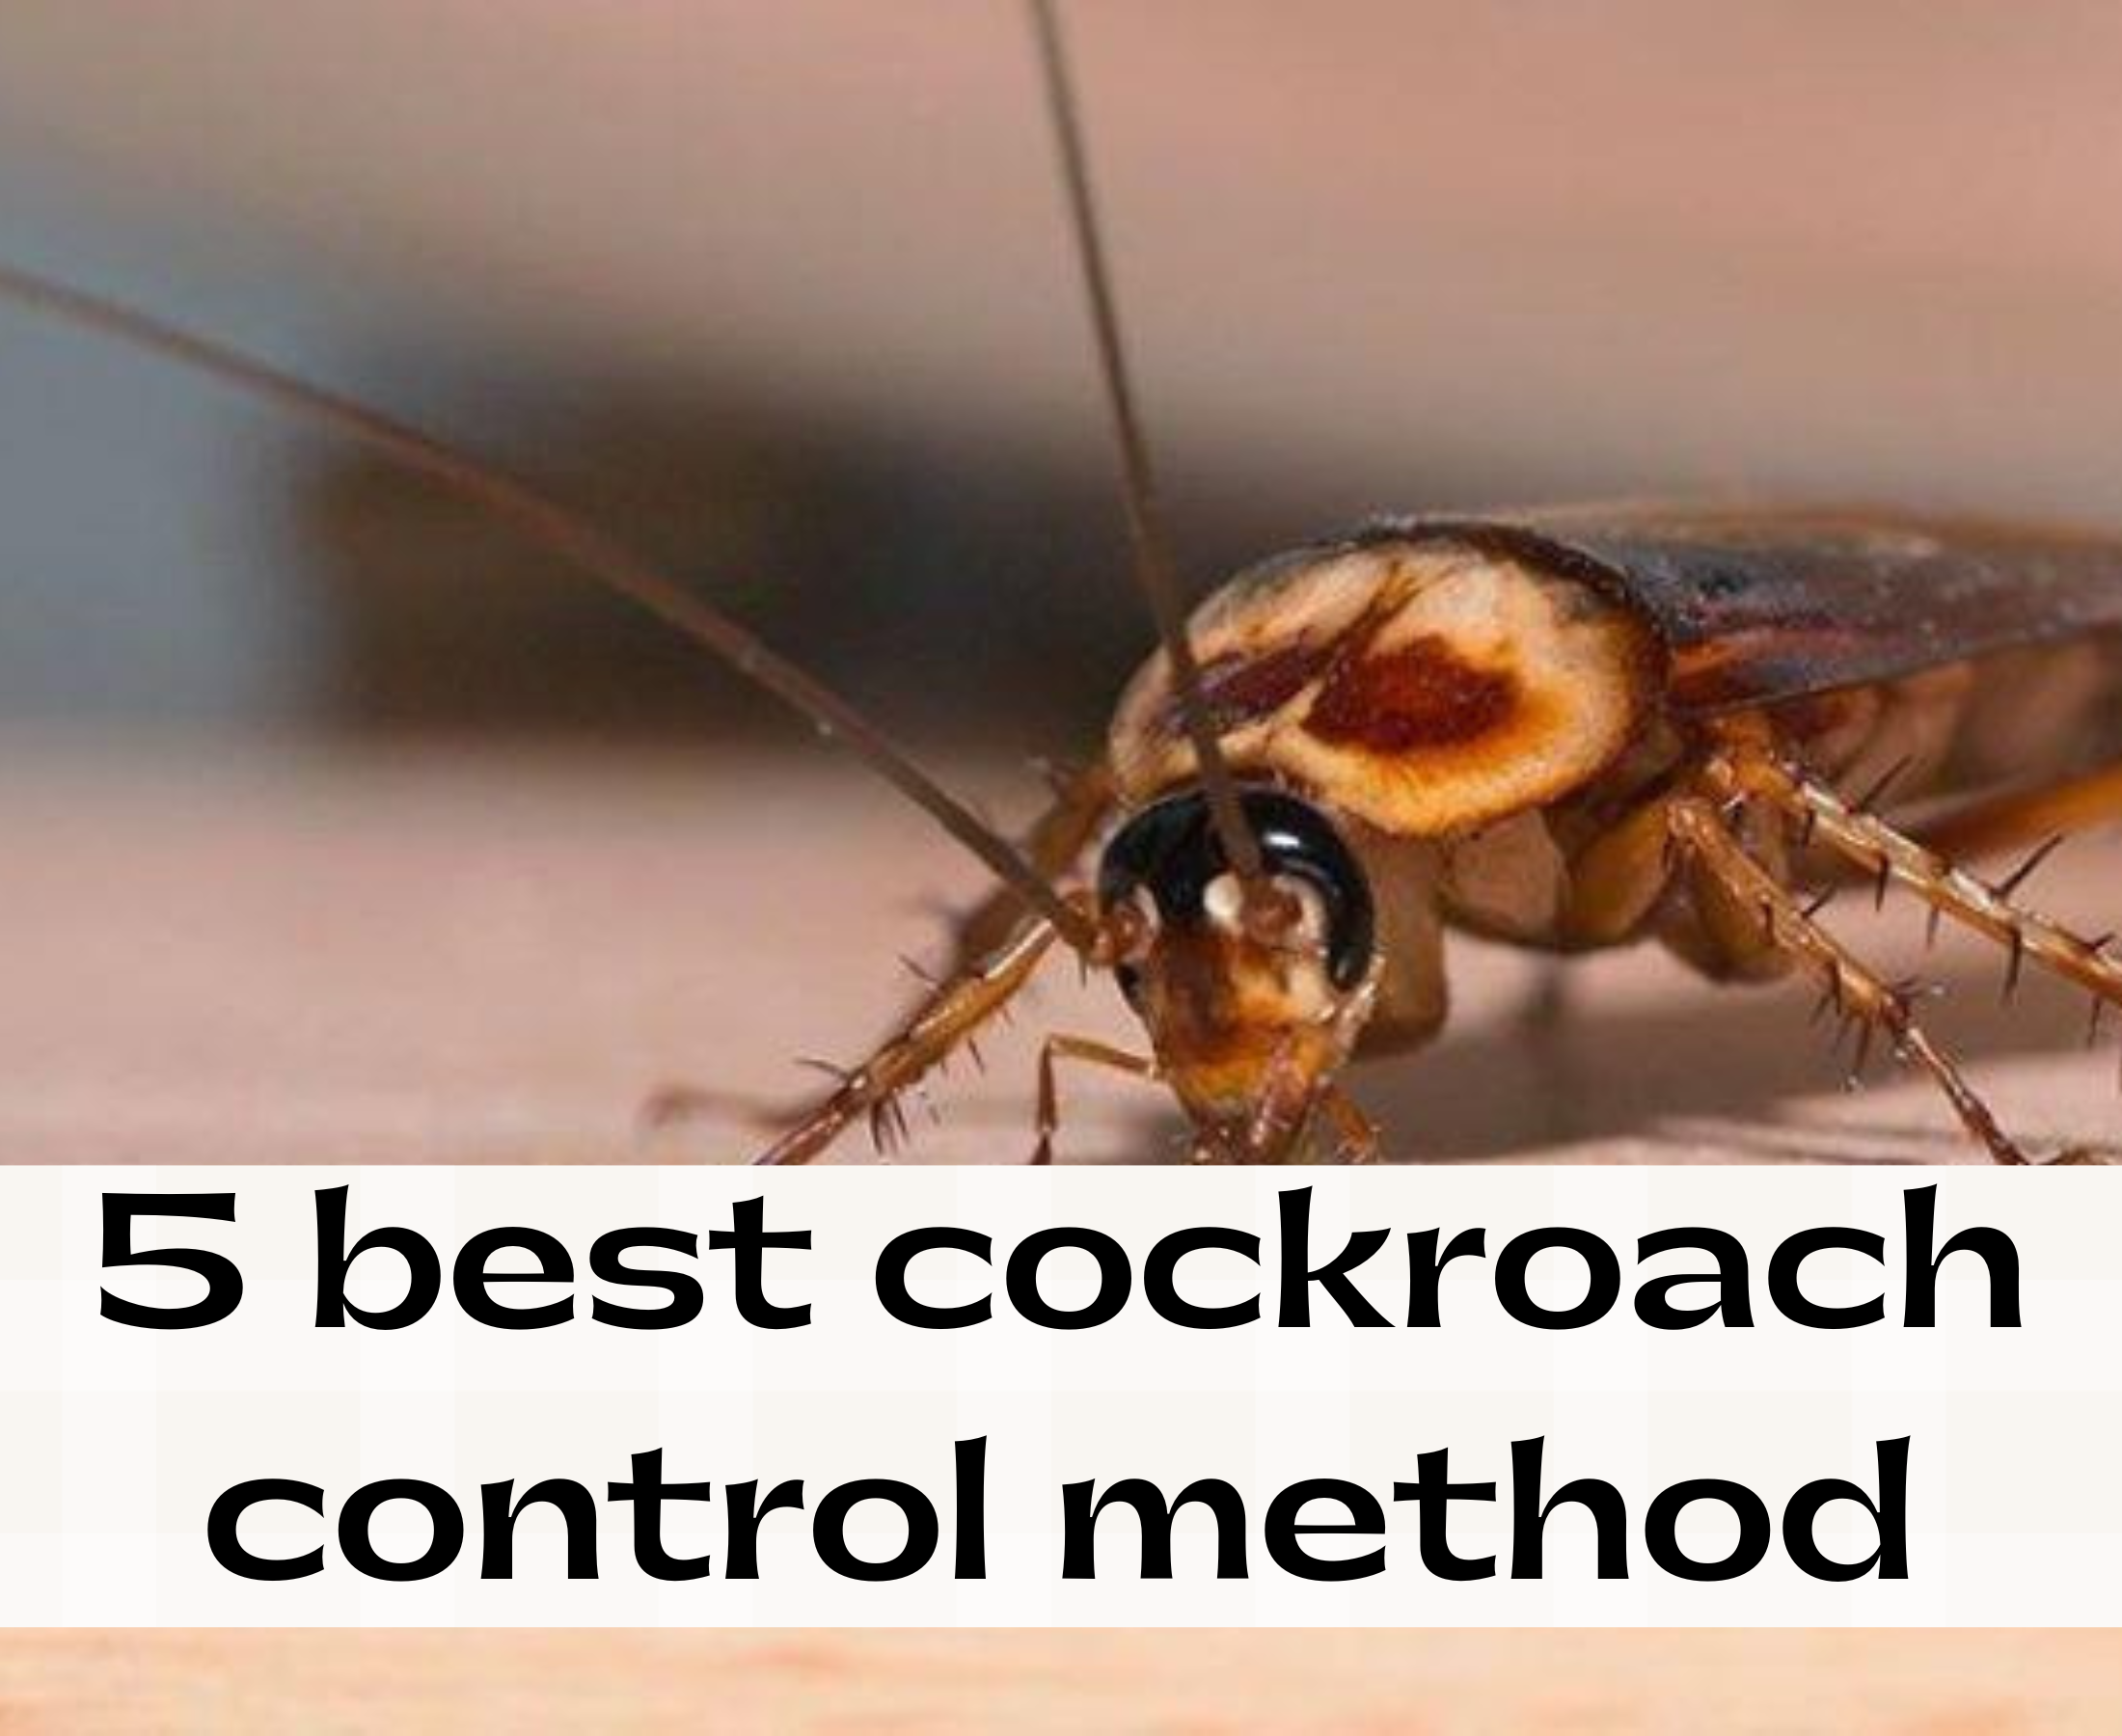 5 best cockroach control method for homes & offices?